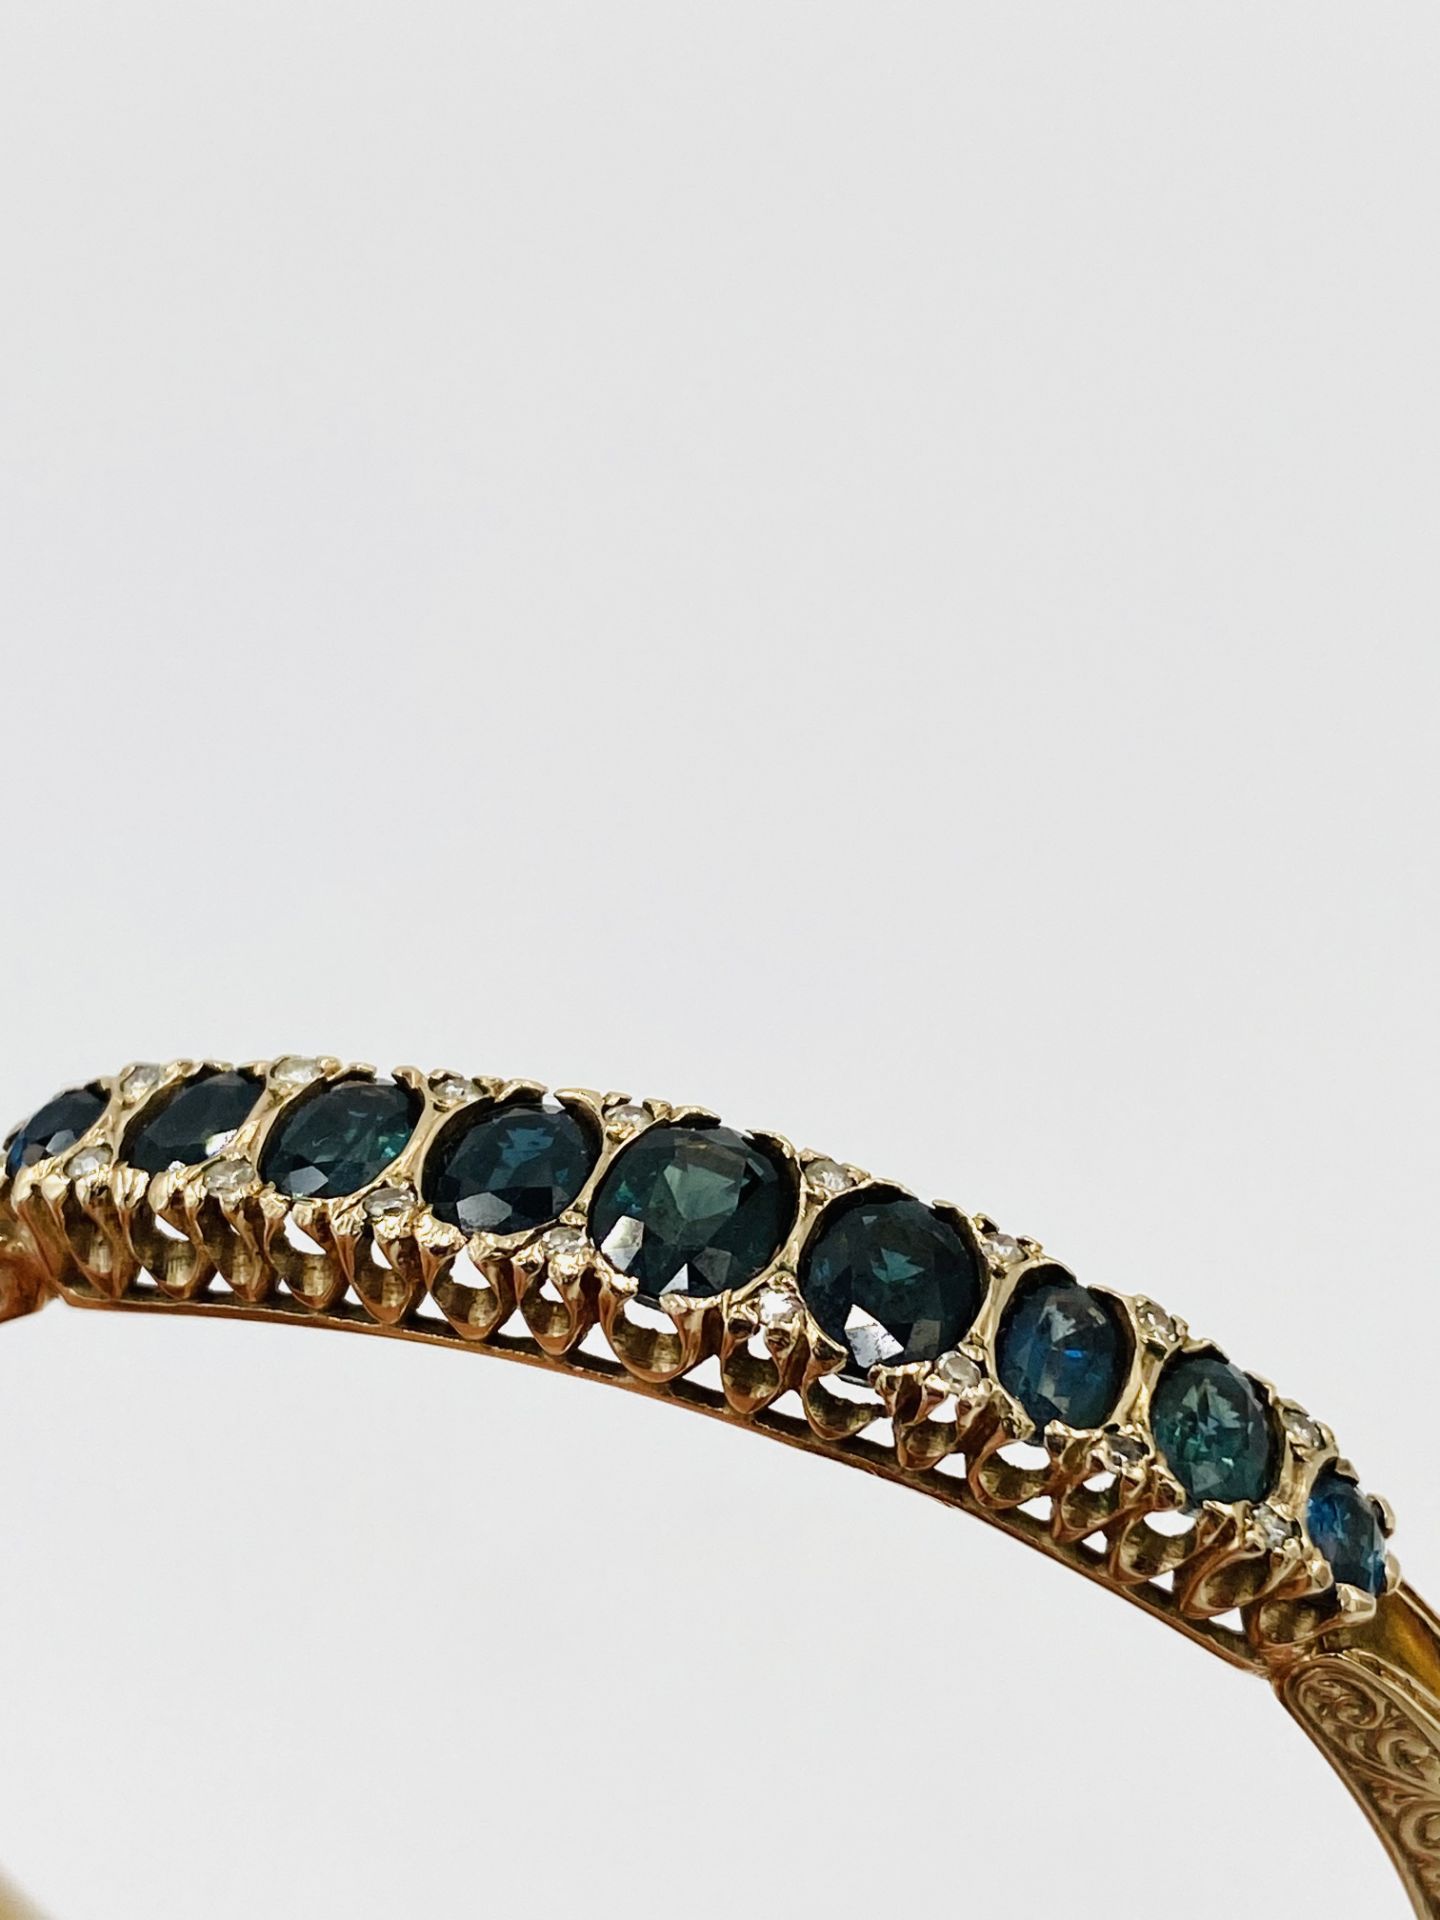 9ct gold and sapphire bracelet - Image 2 of 5